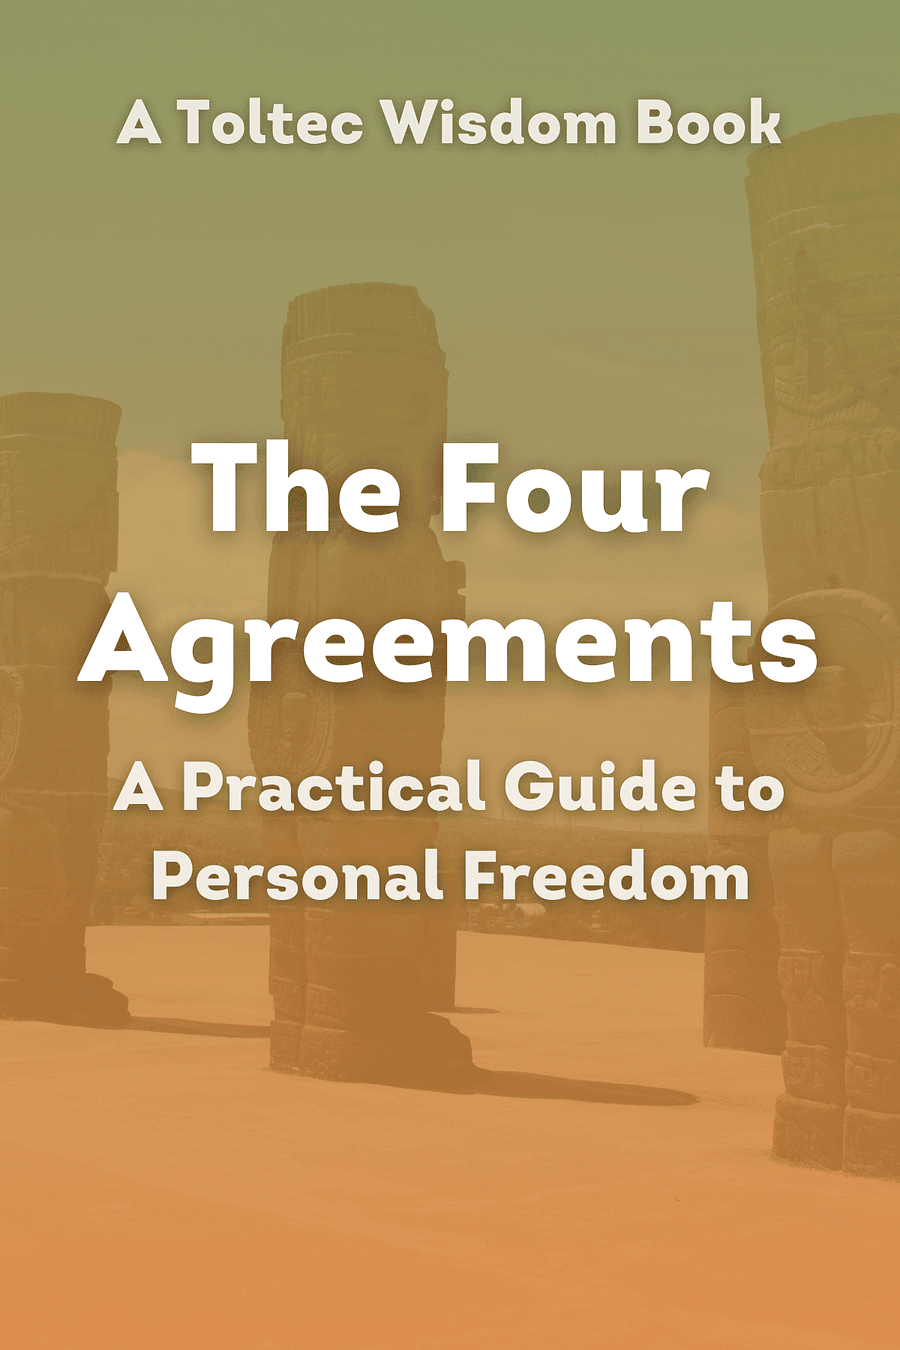 The Four Agreements by Don Miguel Ruiz - Book Summary